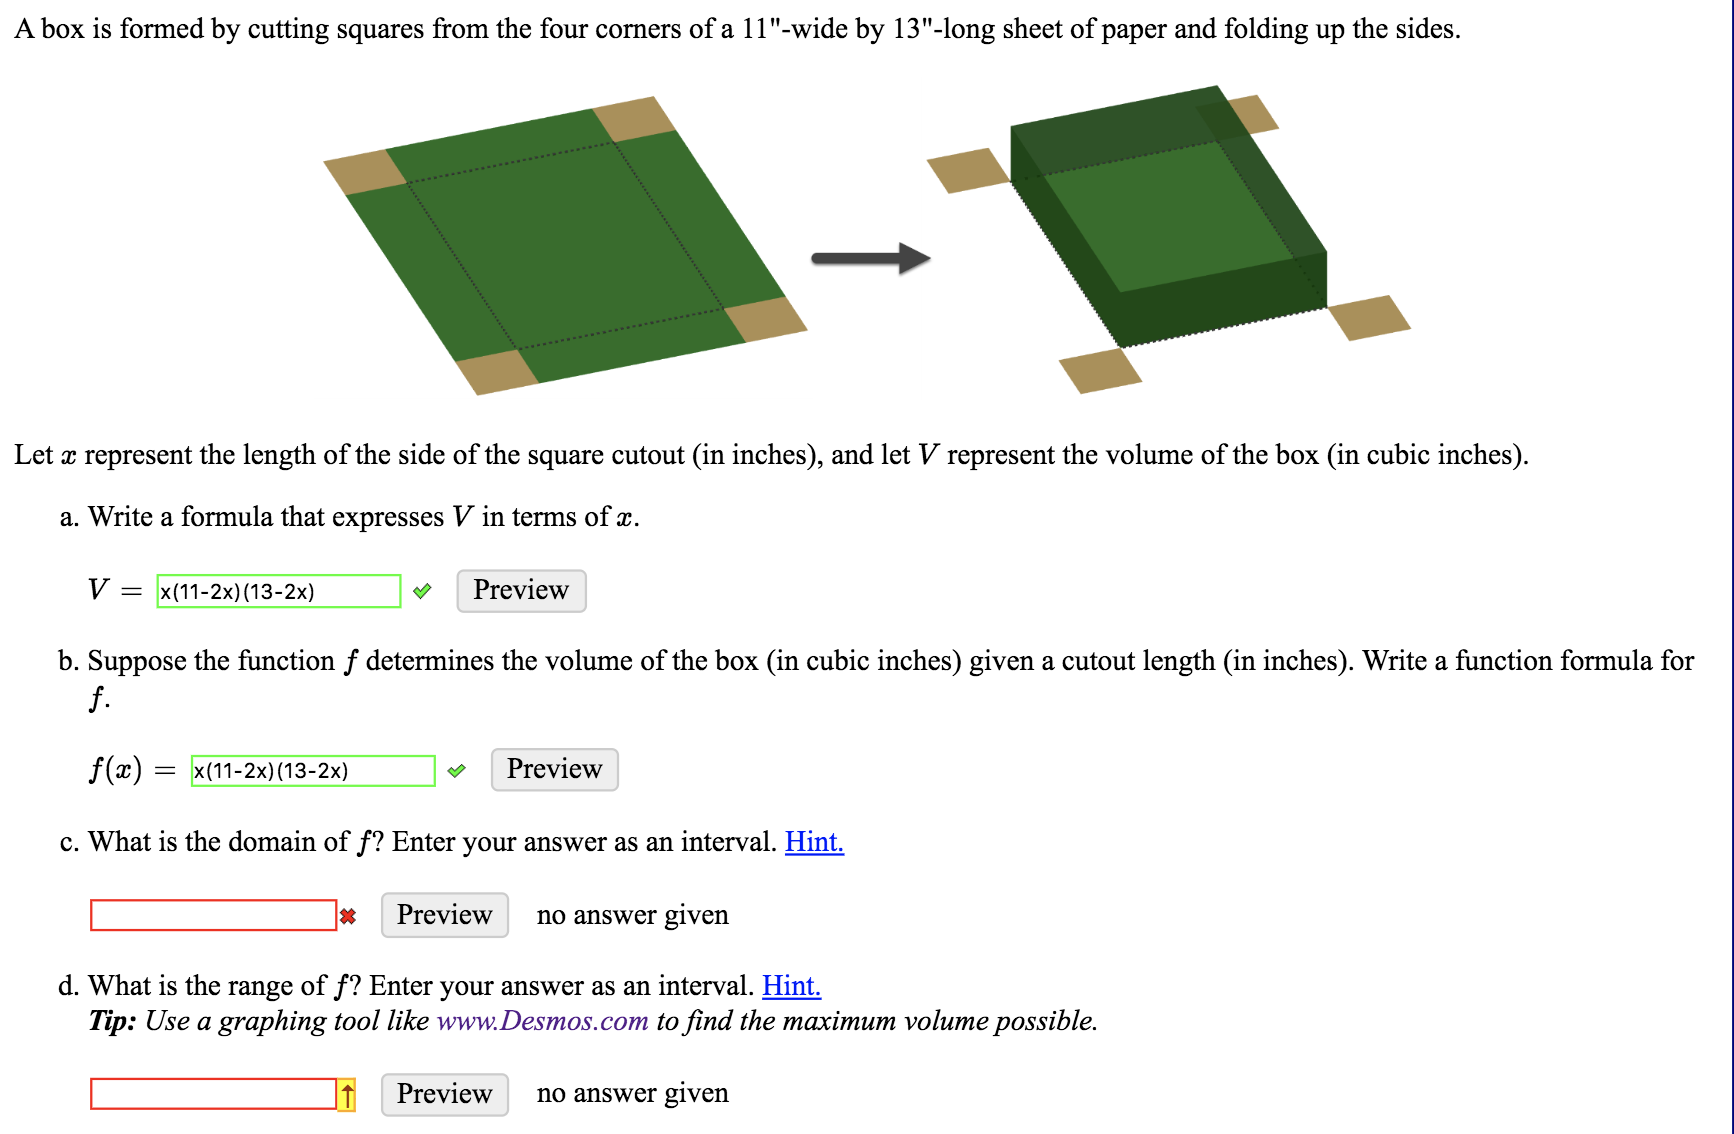 A box is formed by cutting squares from the four corners of a 11"-wide by 13"-long sheet of paper and folding up the sides.
Let x represent the length of the side of the square cutout (in inches), and let V represent the volume of the box (in cubic inches)
a. Write a formula that expresses V in terms of x.
V
Preview
x (11-2x) (13-2x)
b. Suppose the function f determines the volume of the box (in cubic inches) given a cutout length (in inches). Write a function formula for
f.
f(x) = x(11-2x) (13-2x)
Preview
c. What is the domain of f? Enter your answer as an interval. Hint.
Preview
no answer given
d. What is the range of f? Enter your answer as an interval. Hint.
Tip: Use a graphing tool like www.Desmos.com to find the maximum volume possible.
Preview
no answer given
